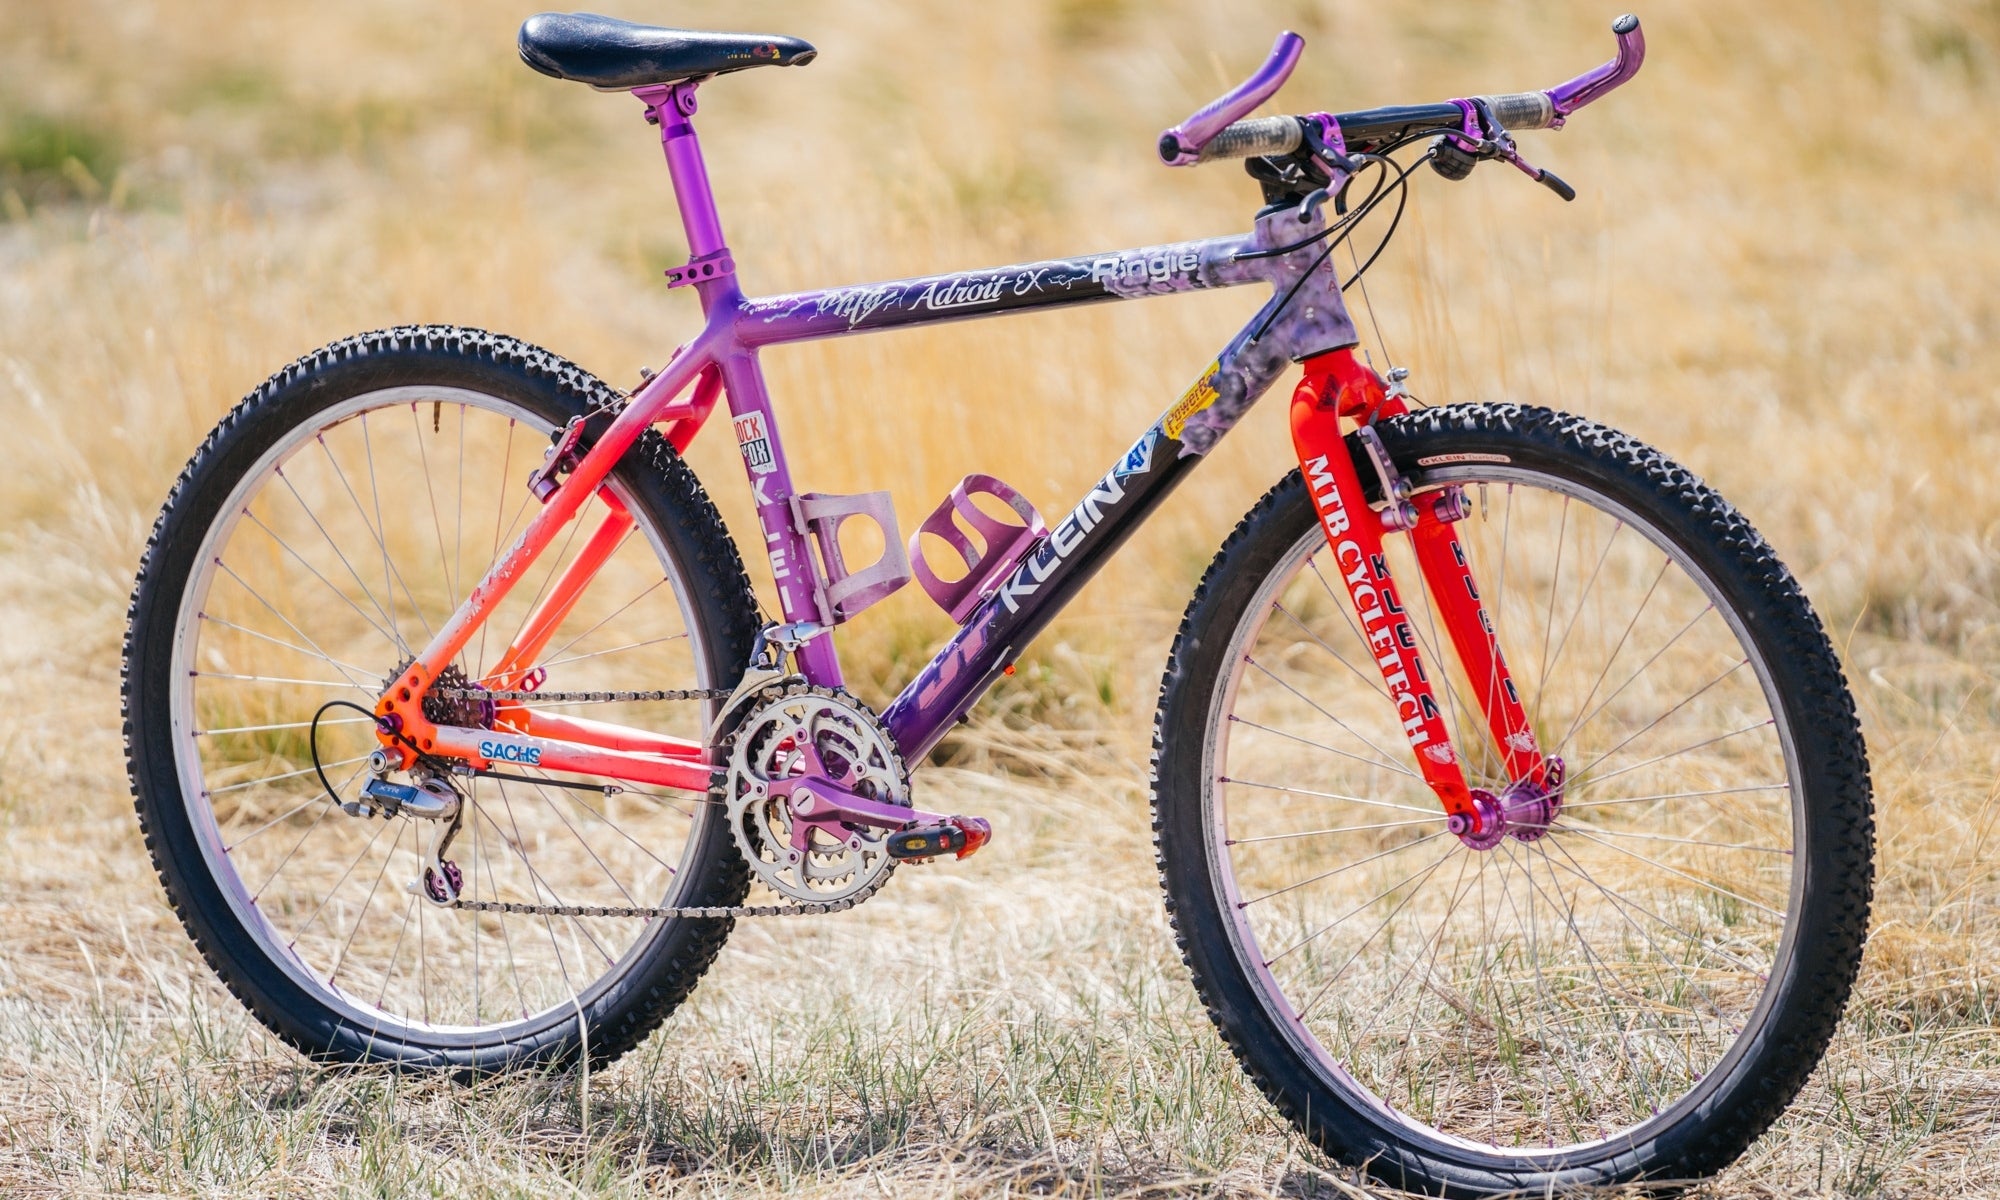 From the Vault: Tinker's Jaw-Dropping Klein Adroit EX MTB